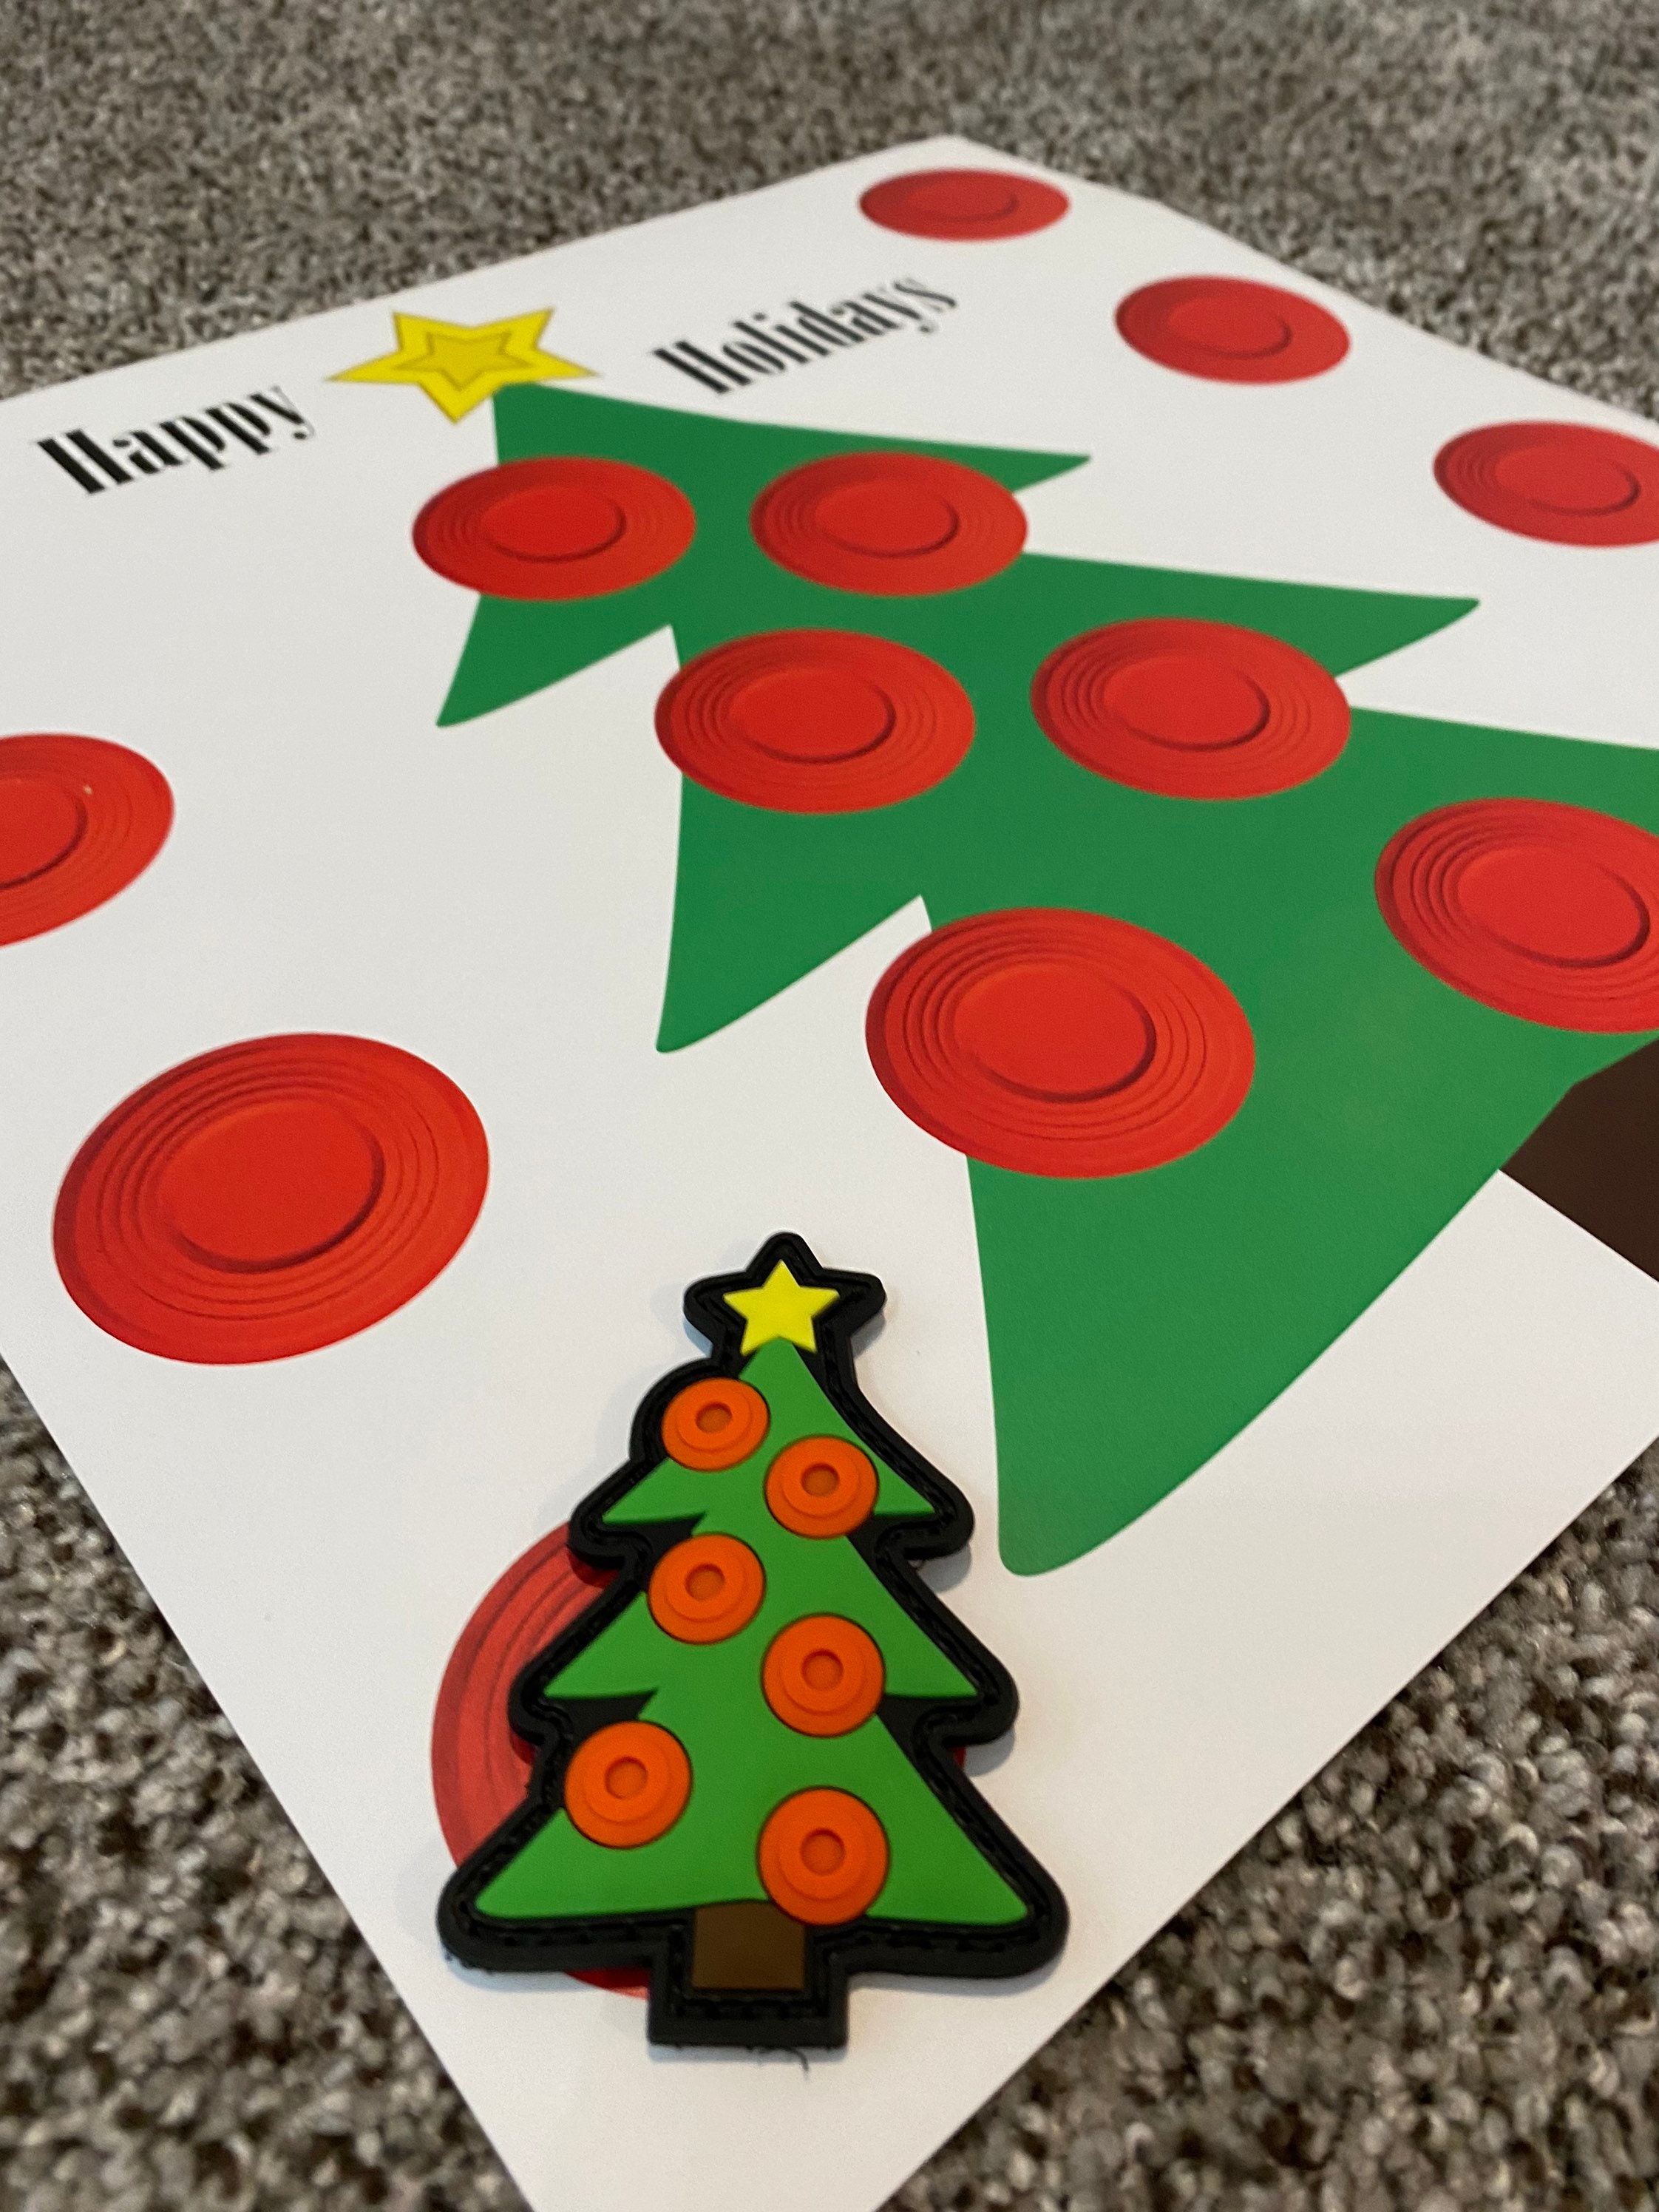 3” x 2” Clay Pigeon Christmas Tree for the Holidays Velcro backed Patch  with 12” x 12” paper target - Quantum Plush